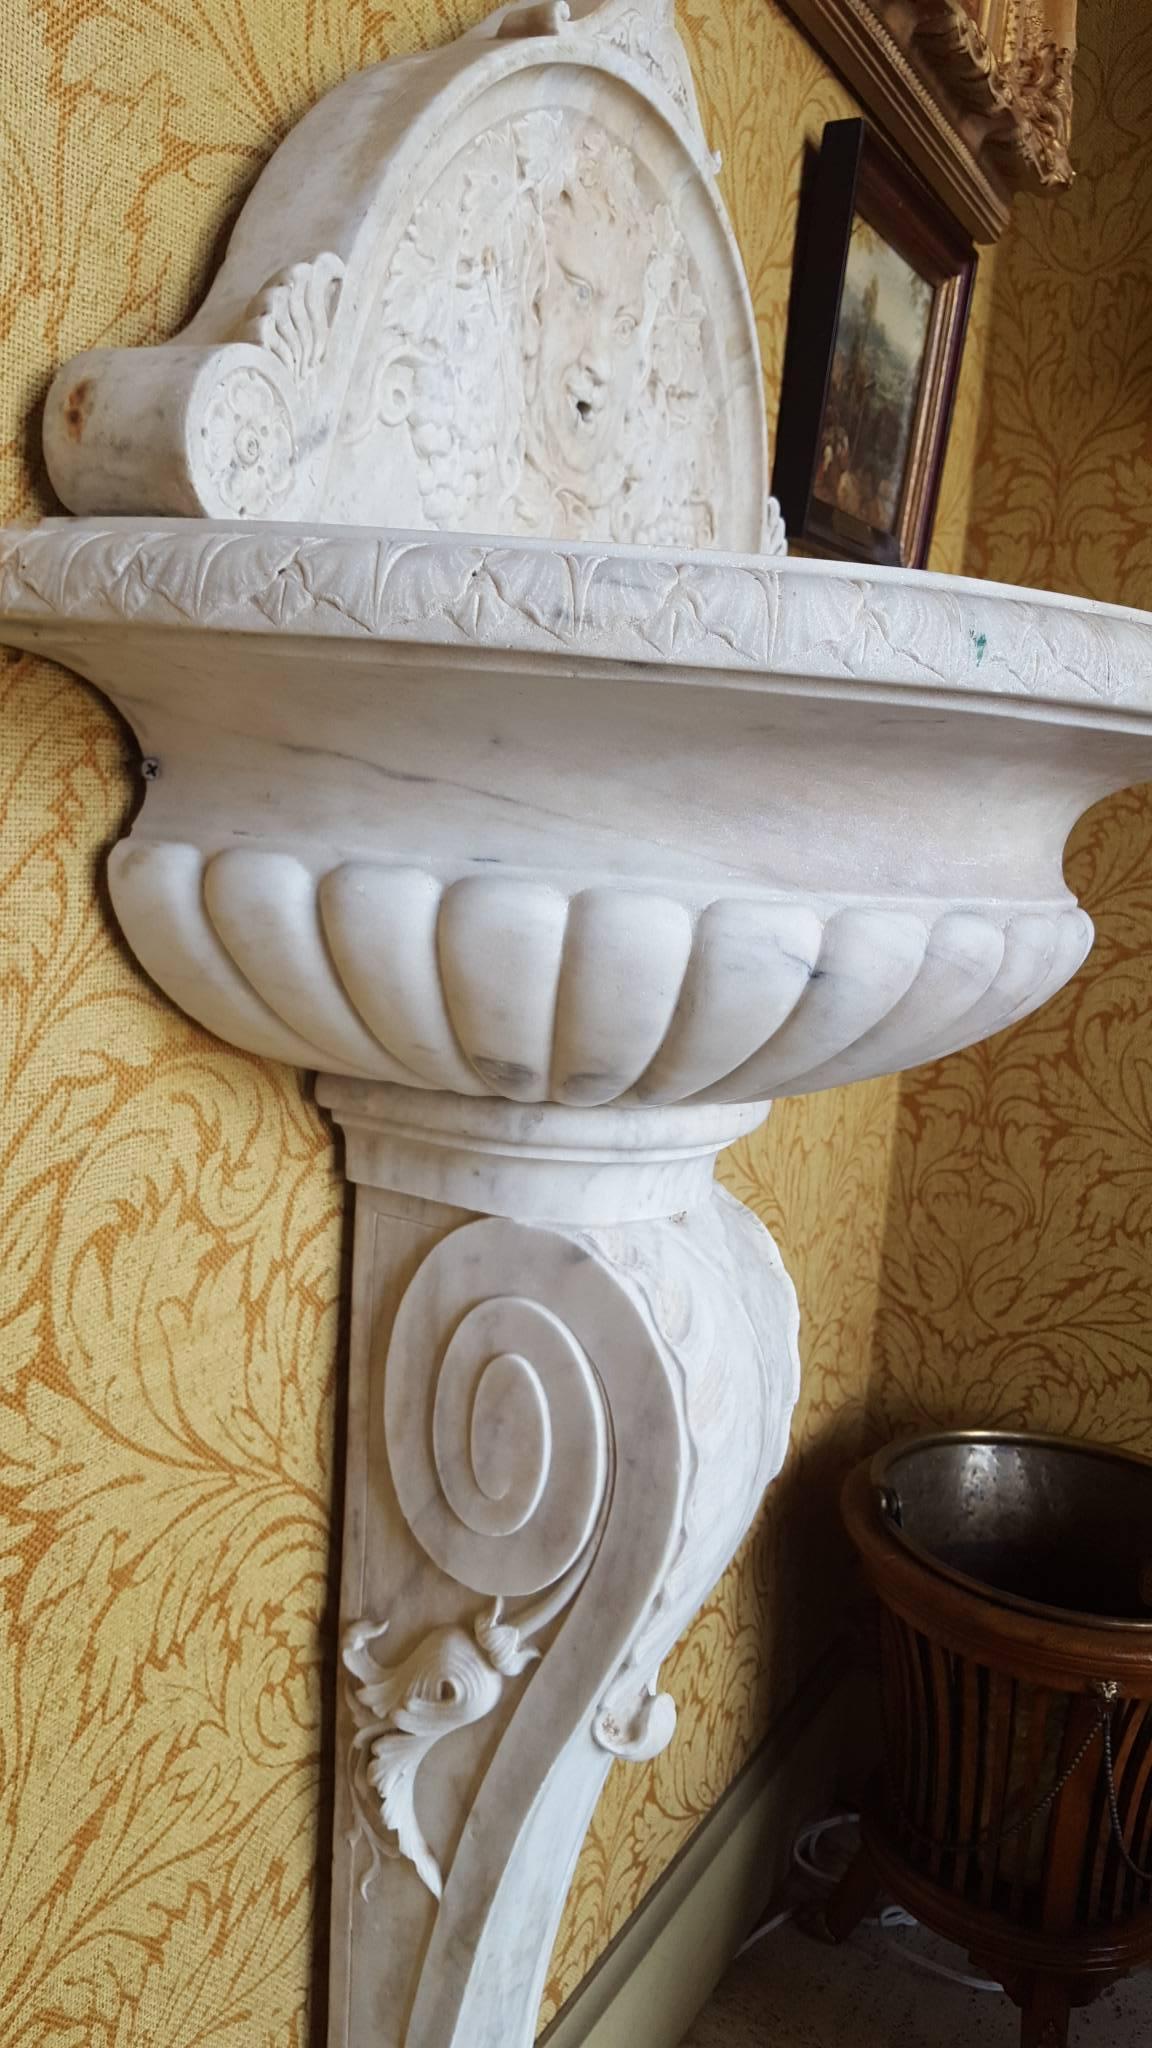 White marble wall fountain features the face of Bacchus surrounded by grape clusters and grape leaves.

Bowl of fountain bowl is fluted and rests on a single pedestal with more patterns in relief.